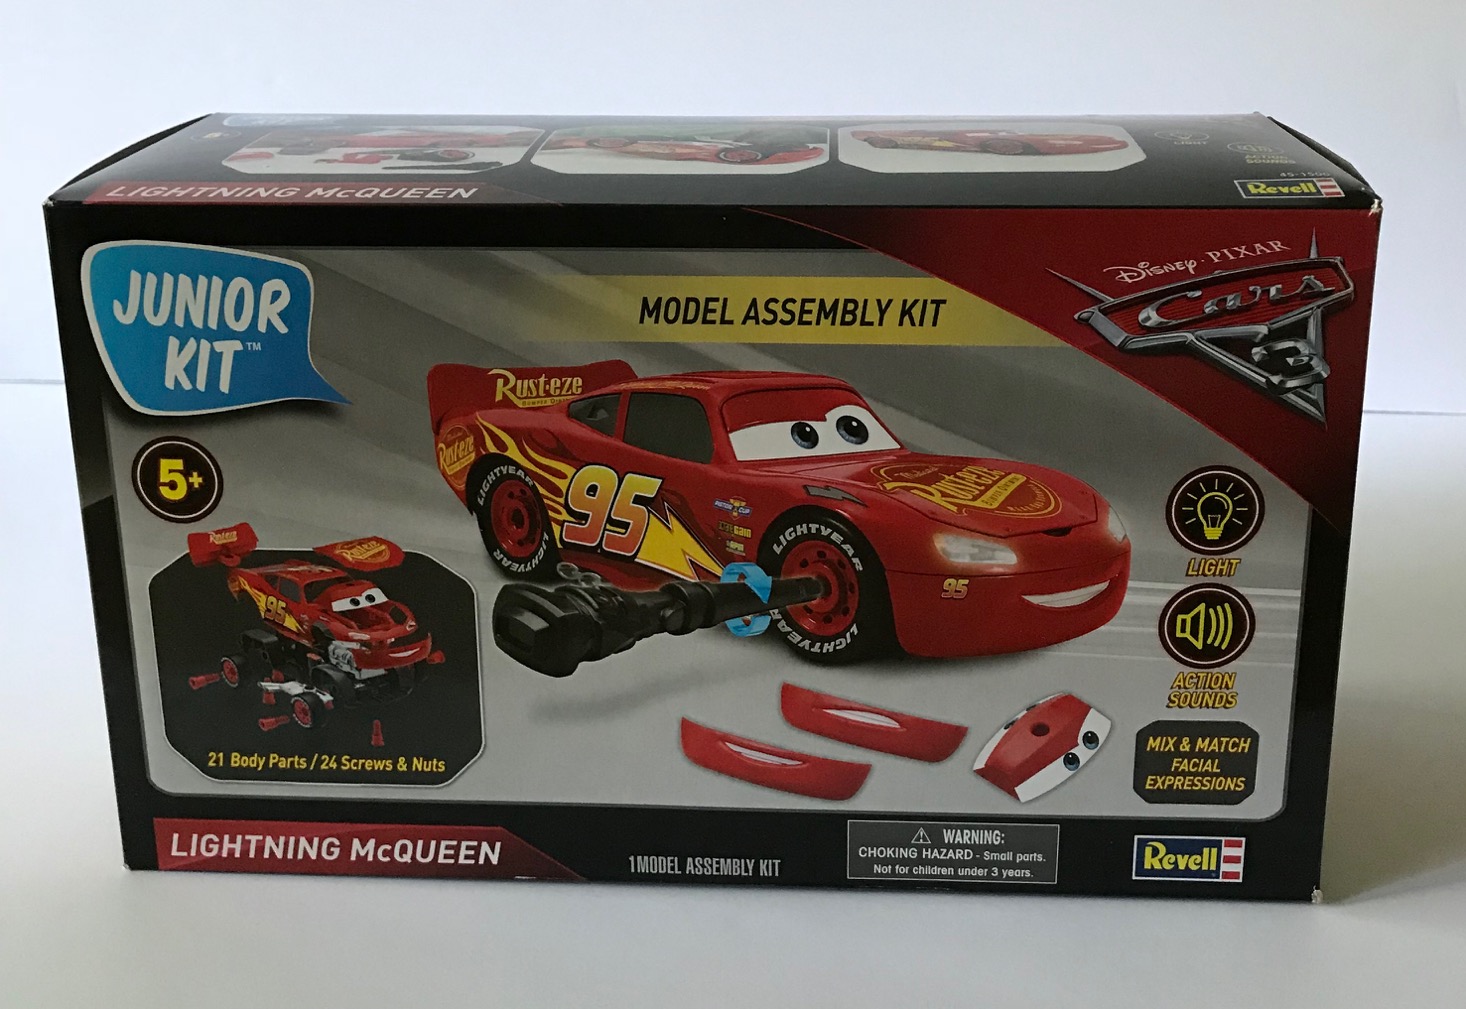 Amazon STEM Toy Club Review, Ages 5 to 7 – June 2018